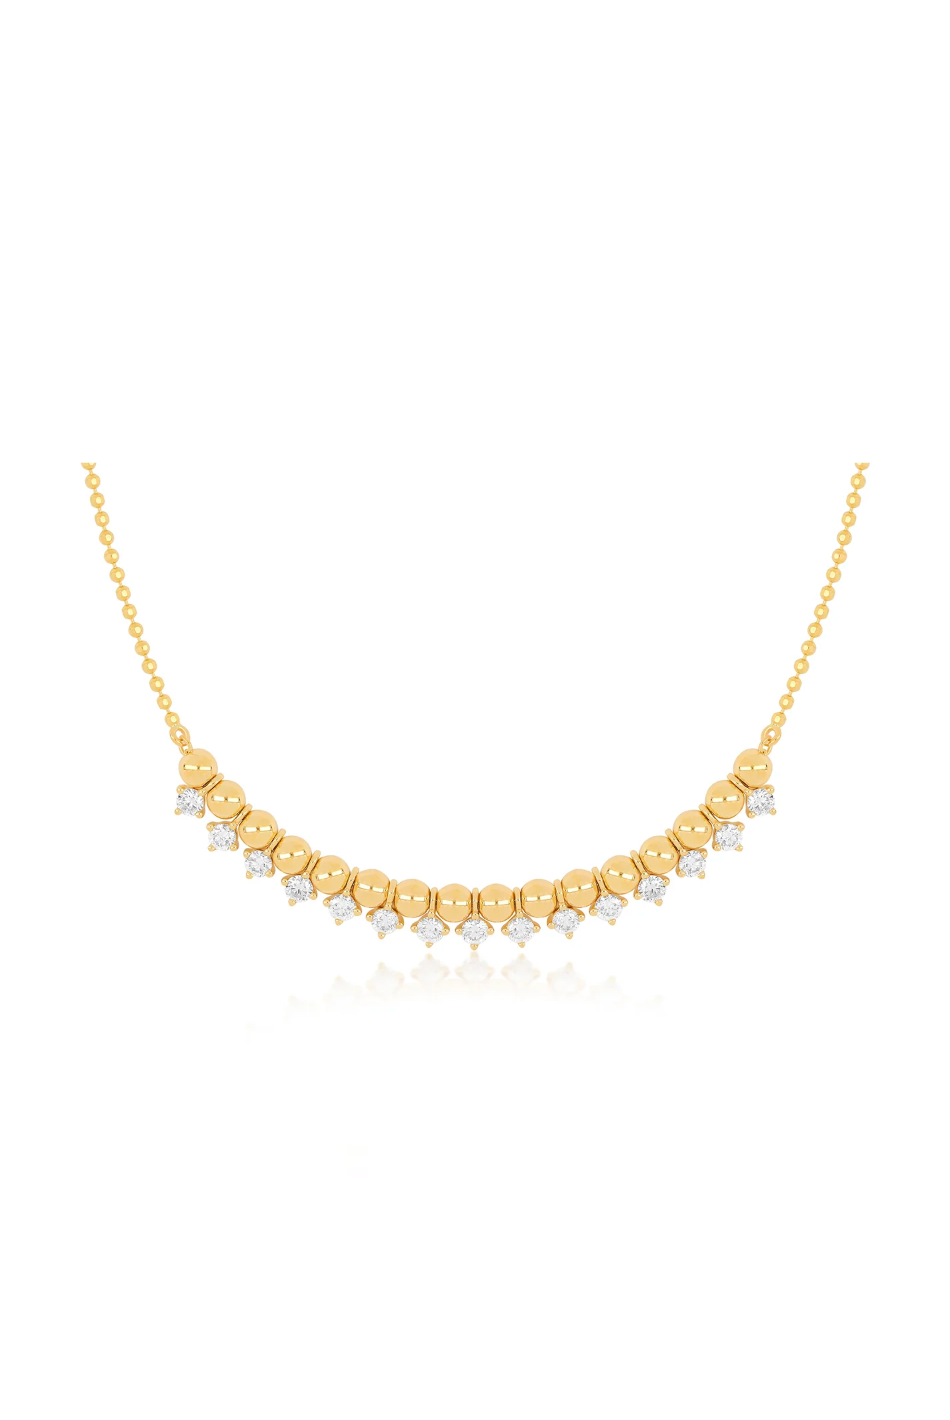 14KY Diamond and Gold Ball Necklace